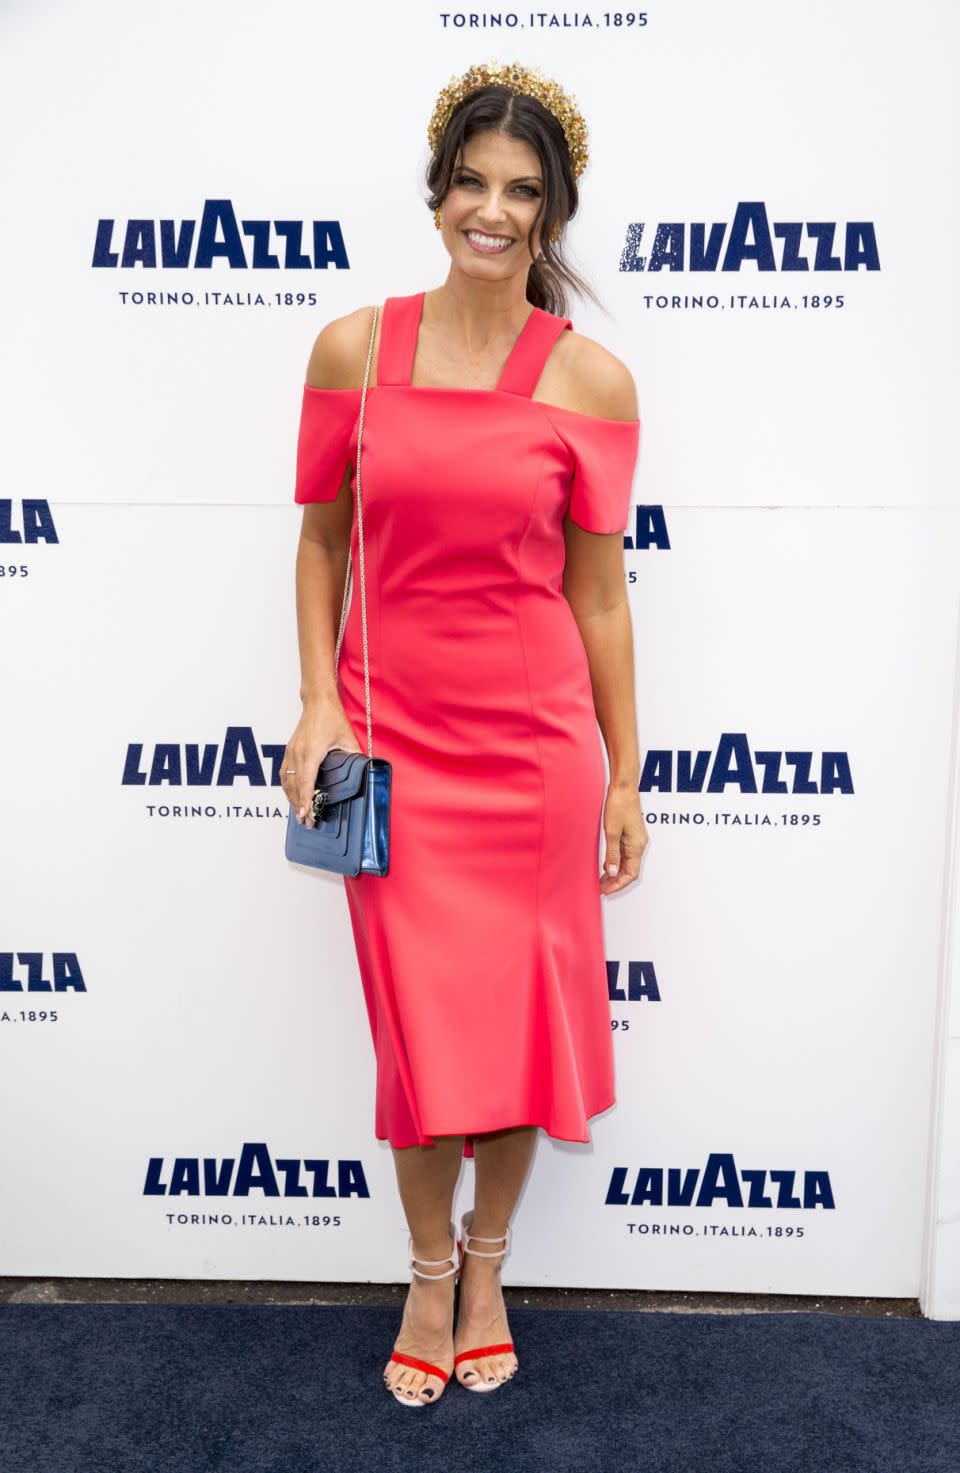 Lavazza ambassador and former Packed to the Rafters star Zoe Ventoura was also looking pretty in pink. Photo: Media Mode